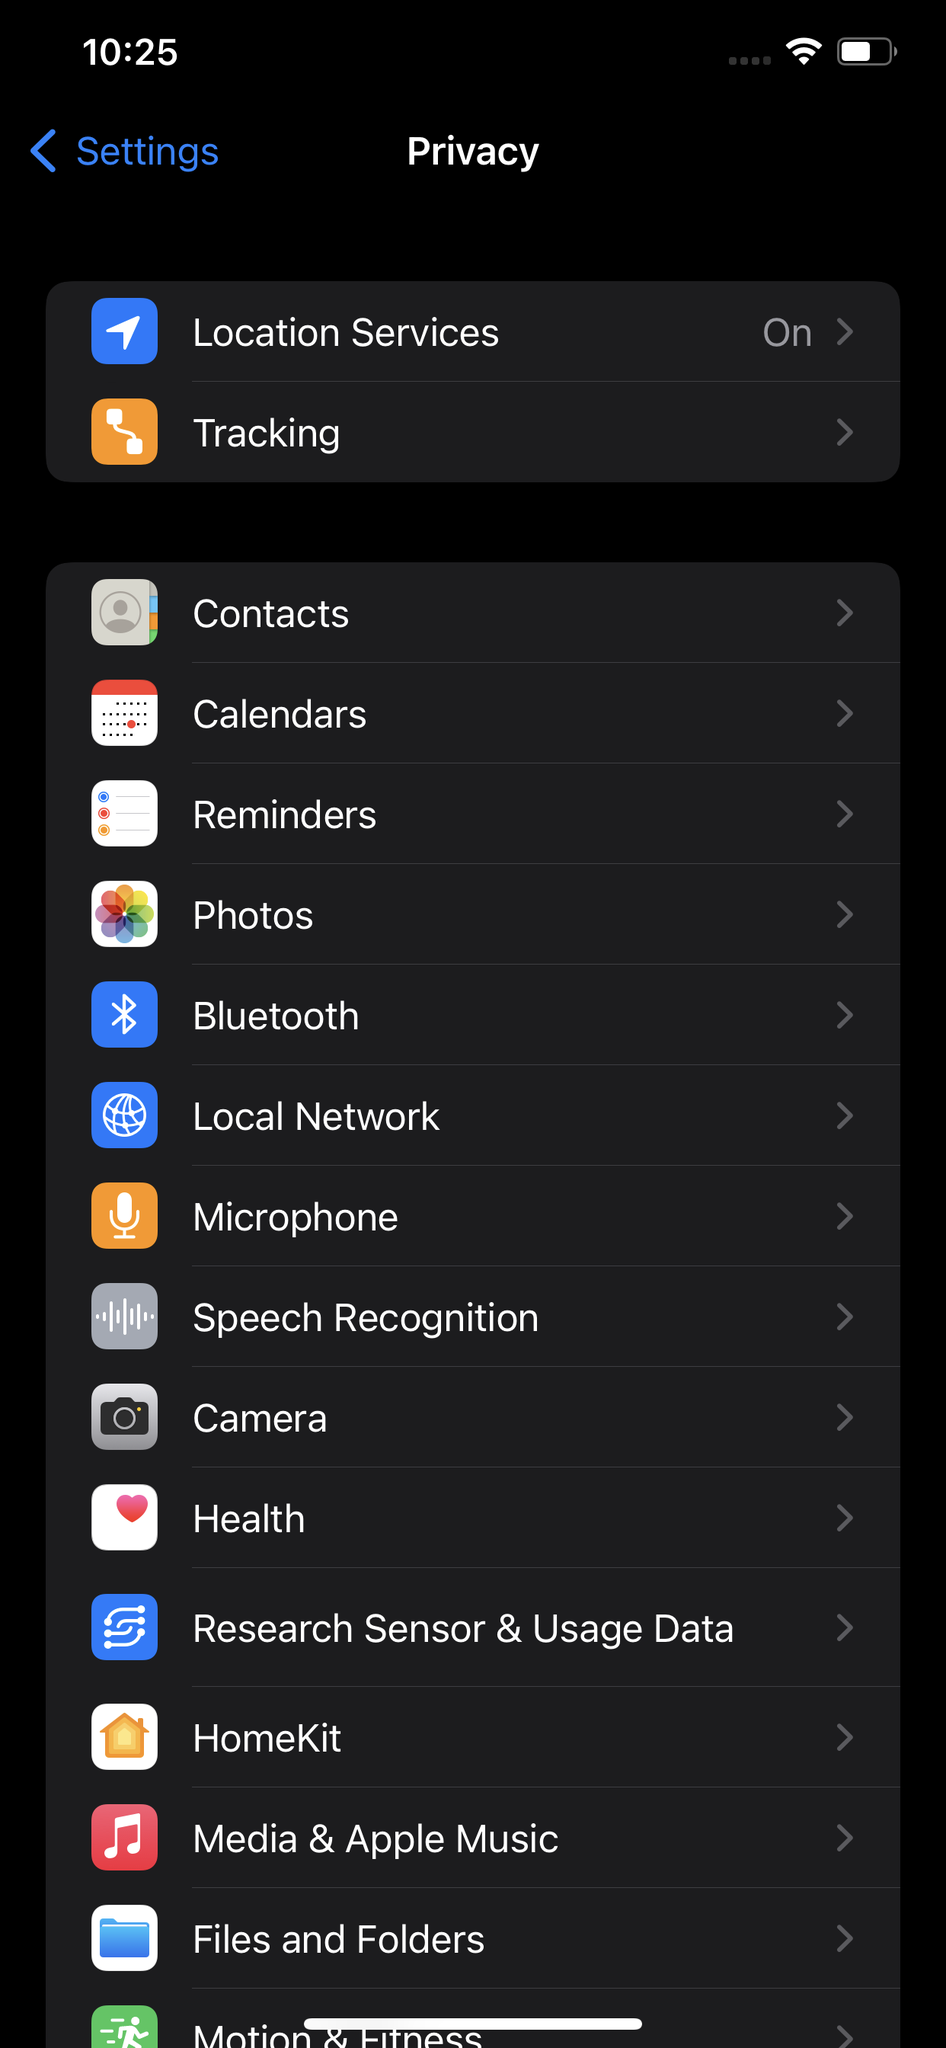 Location Services in Privacy Settings in iPhone